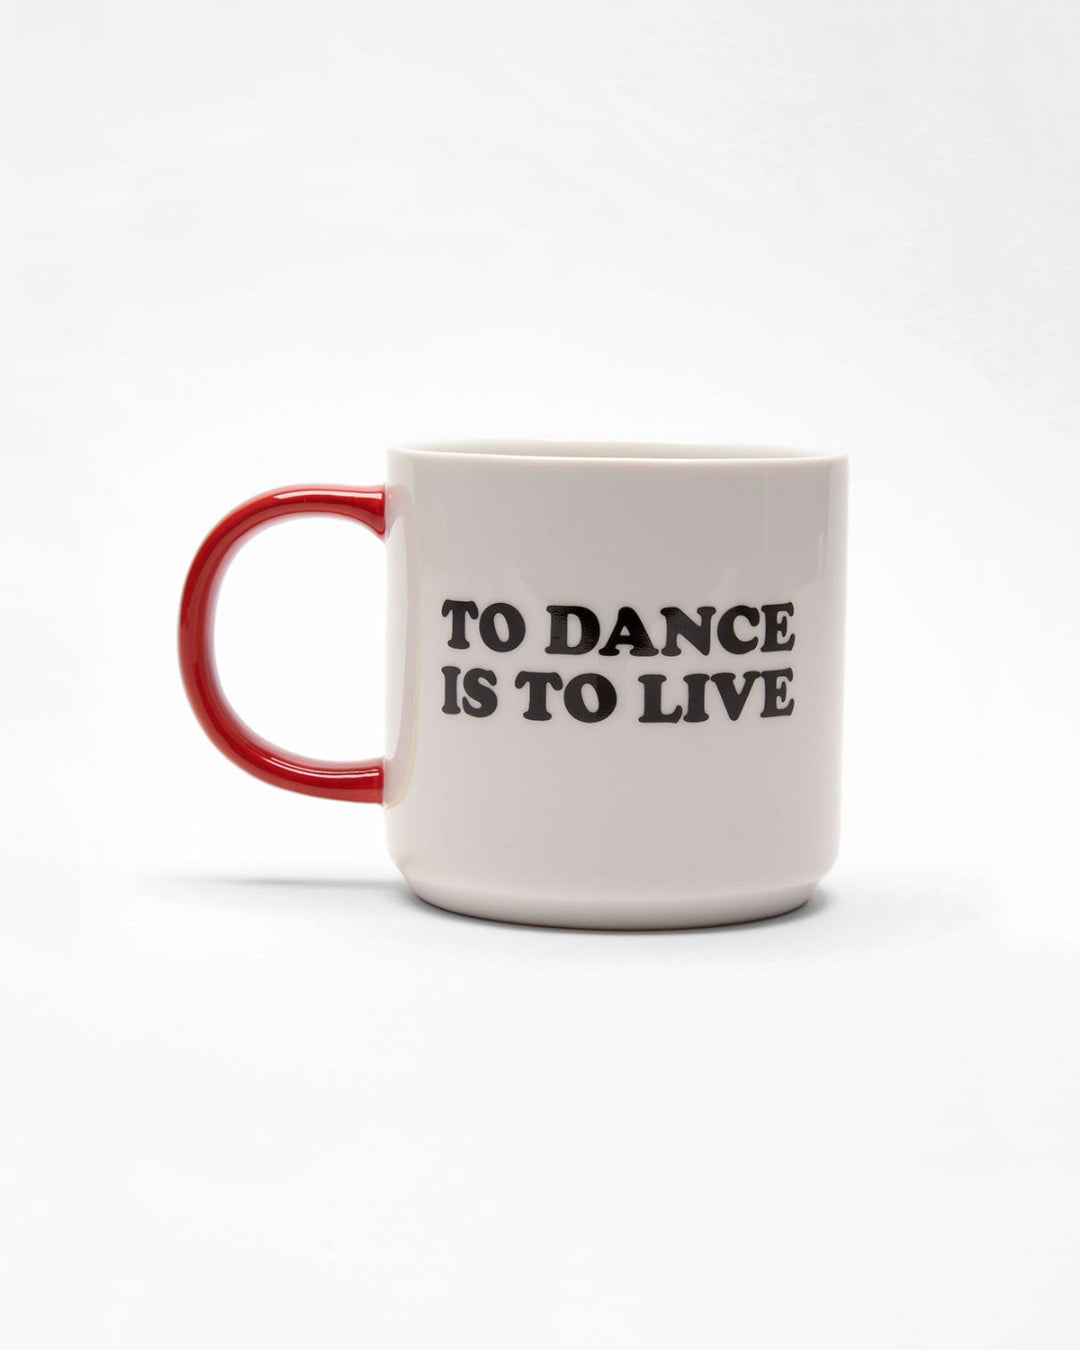 Peanuts Mug - To Dance Is To Live [PRE ORDER]